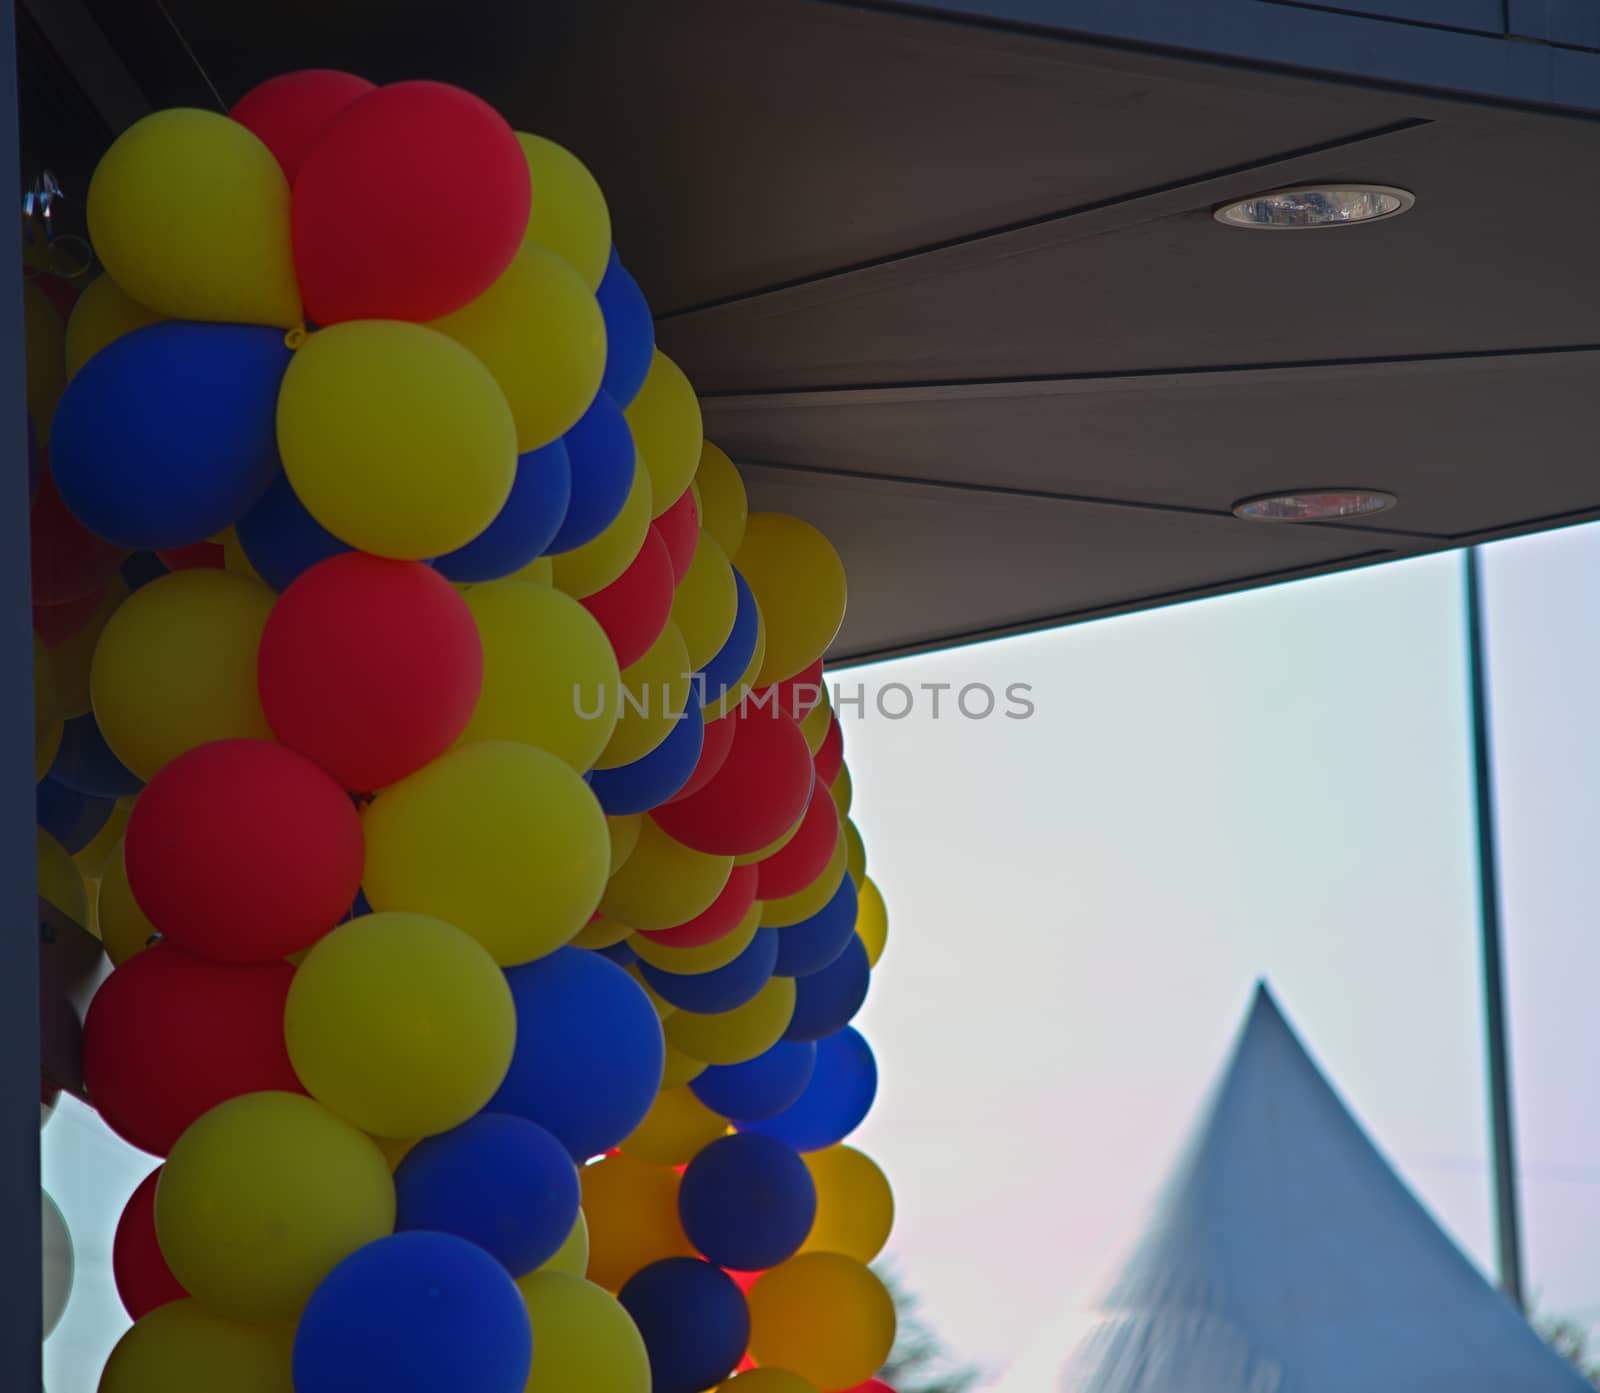 Colorful balloons over glass entrance door by sheriffkule